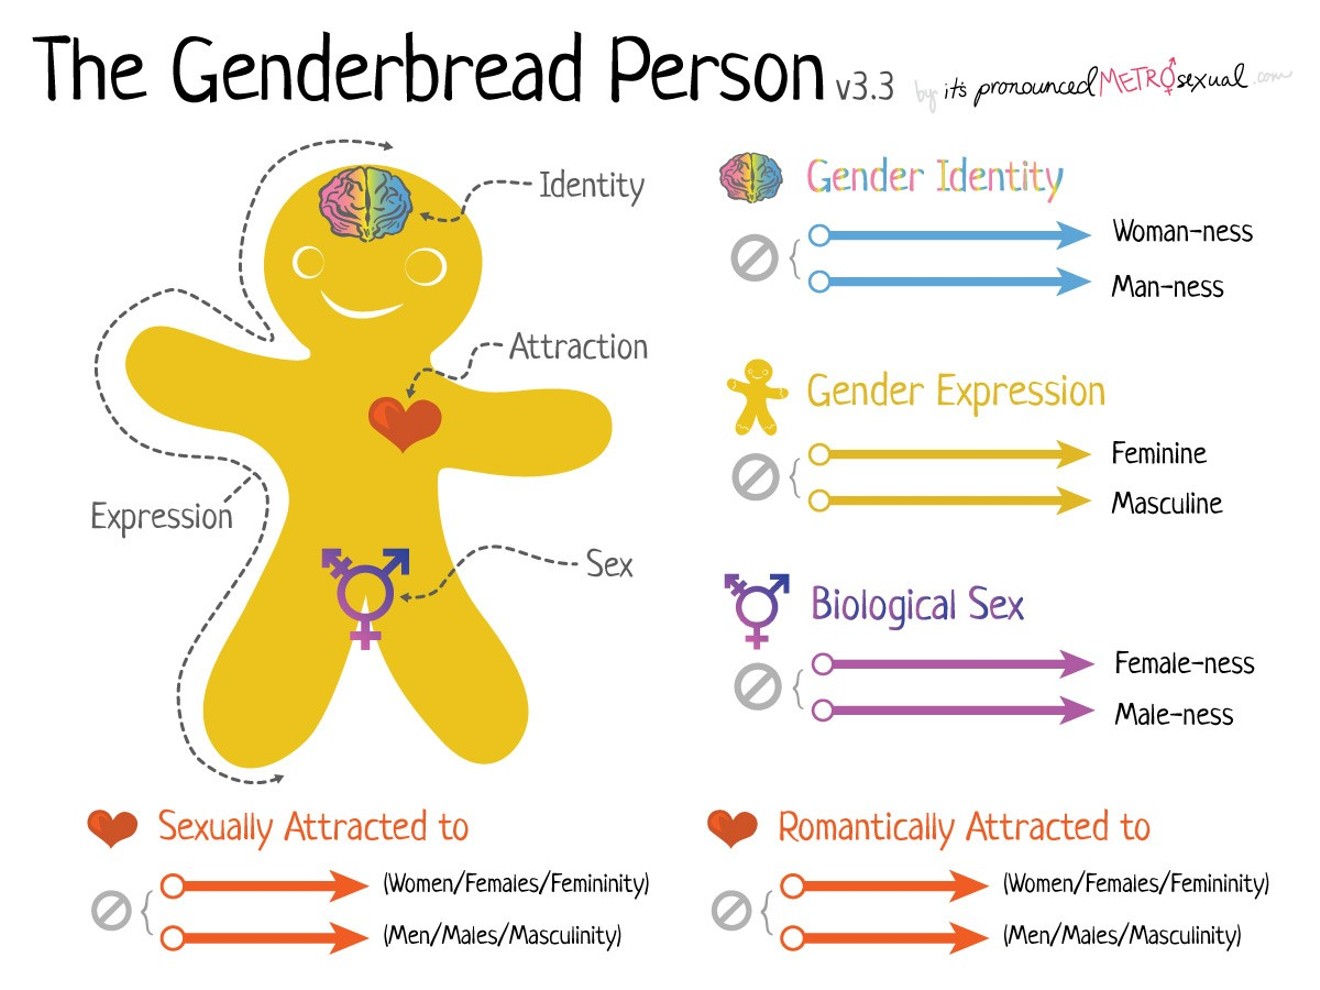 Diana Fedderman claims the Genderbread Person was unceremoniously yanked from a high school curriculum.